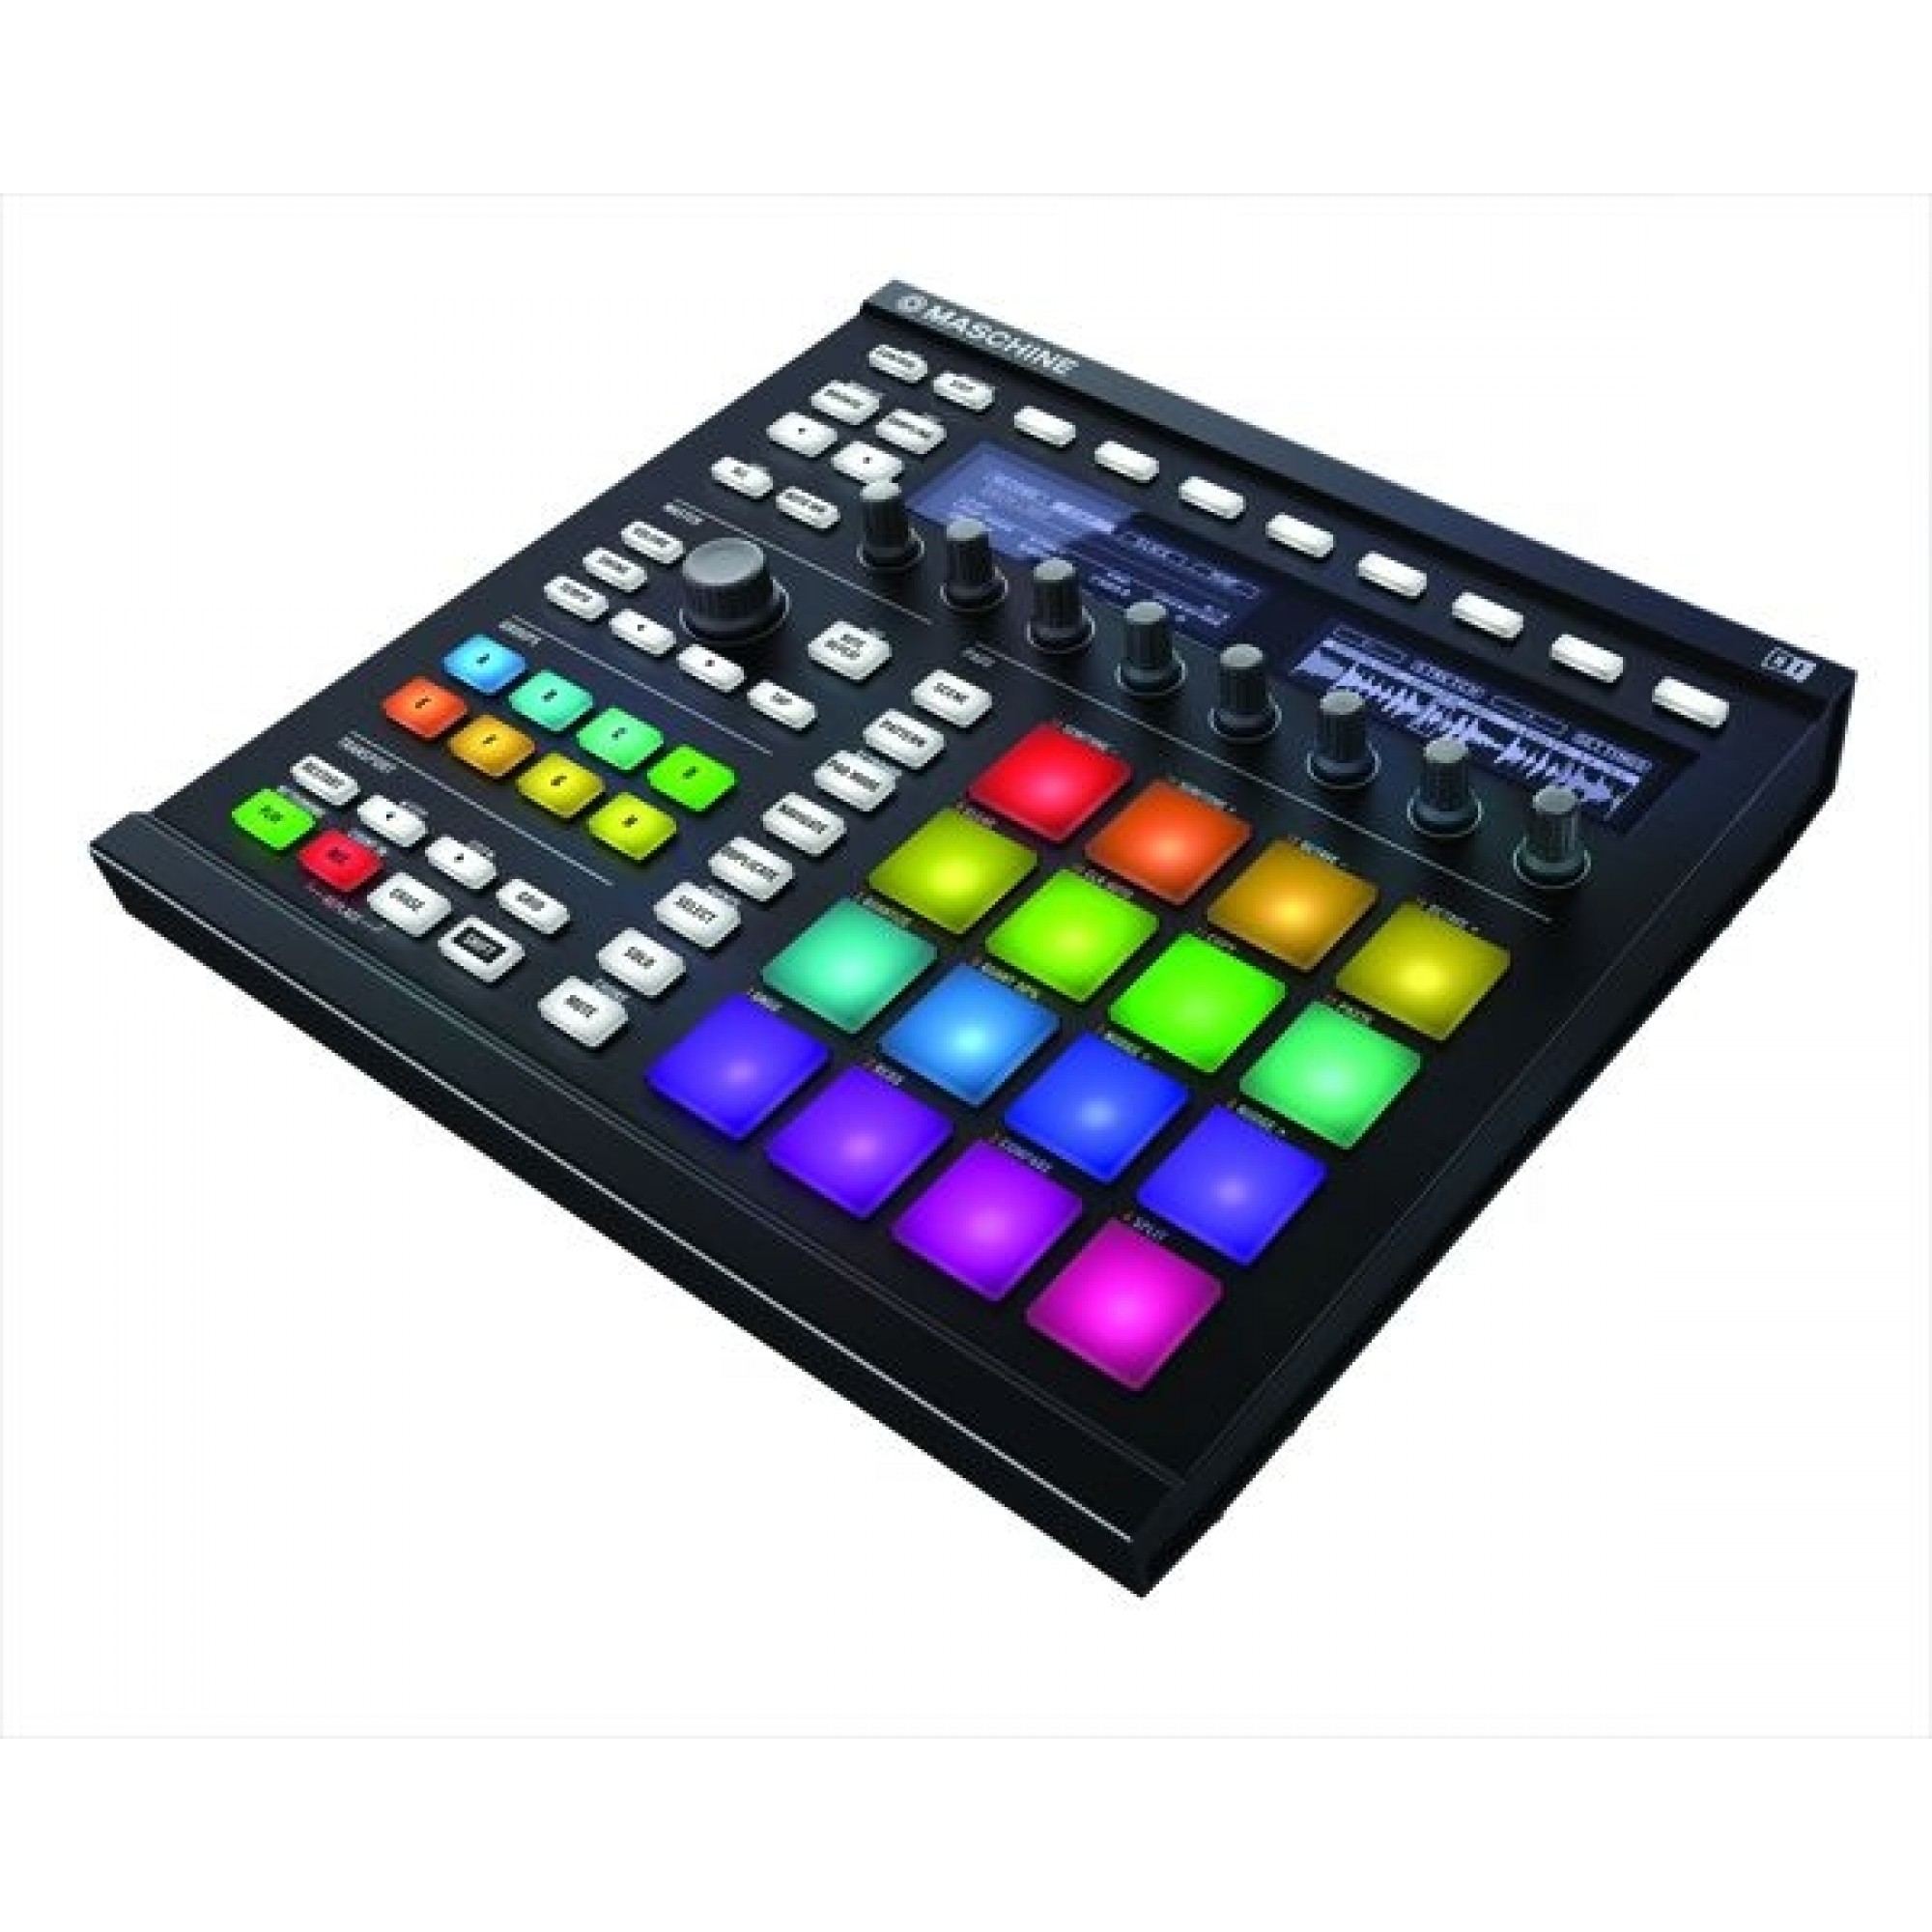 Early Black Friday On Reverb: Get 50% OFF NI Maschine MK3